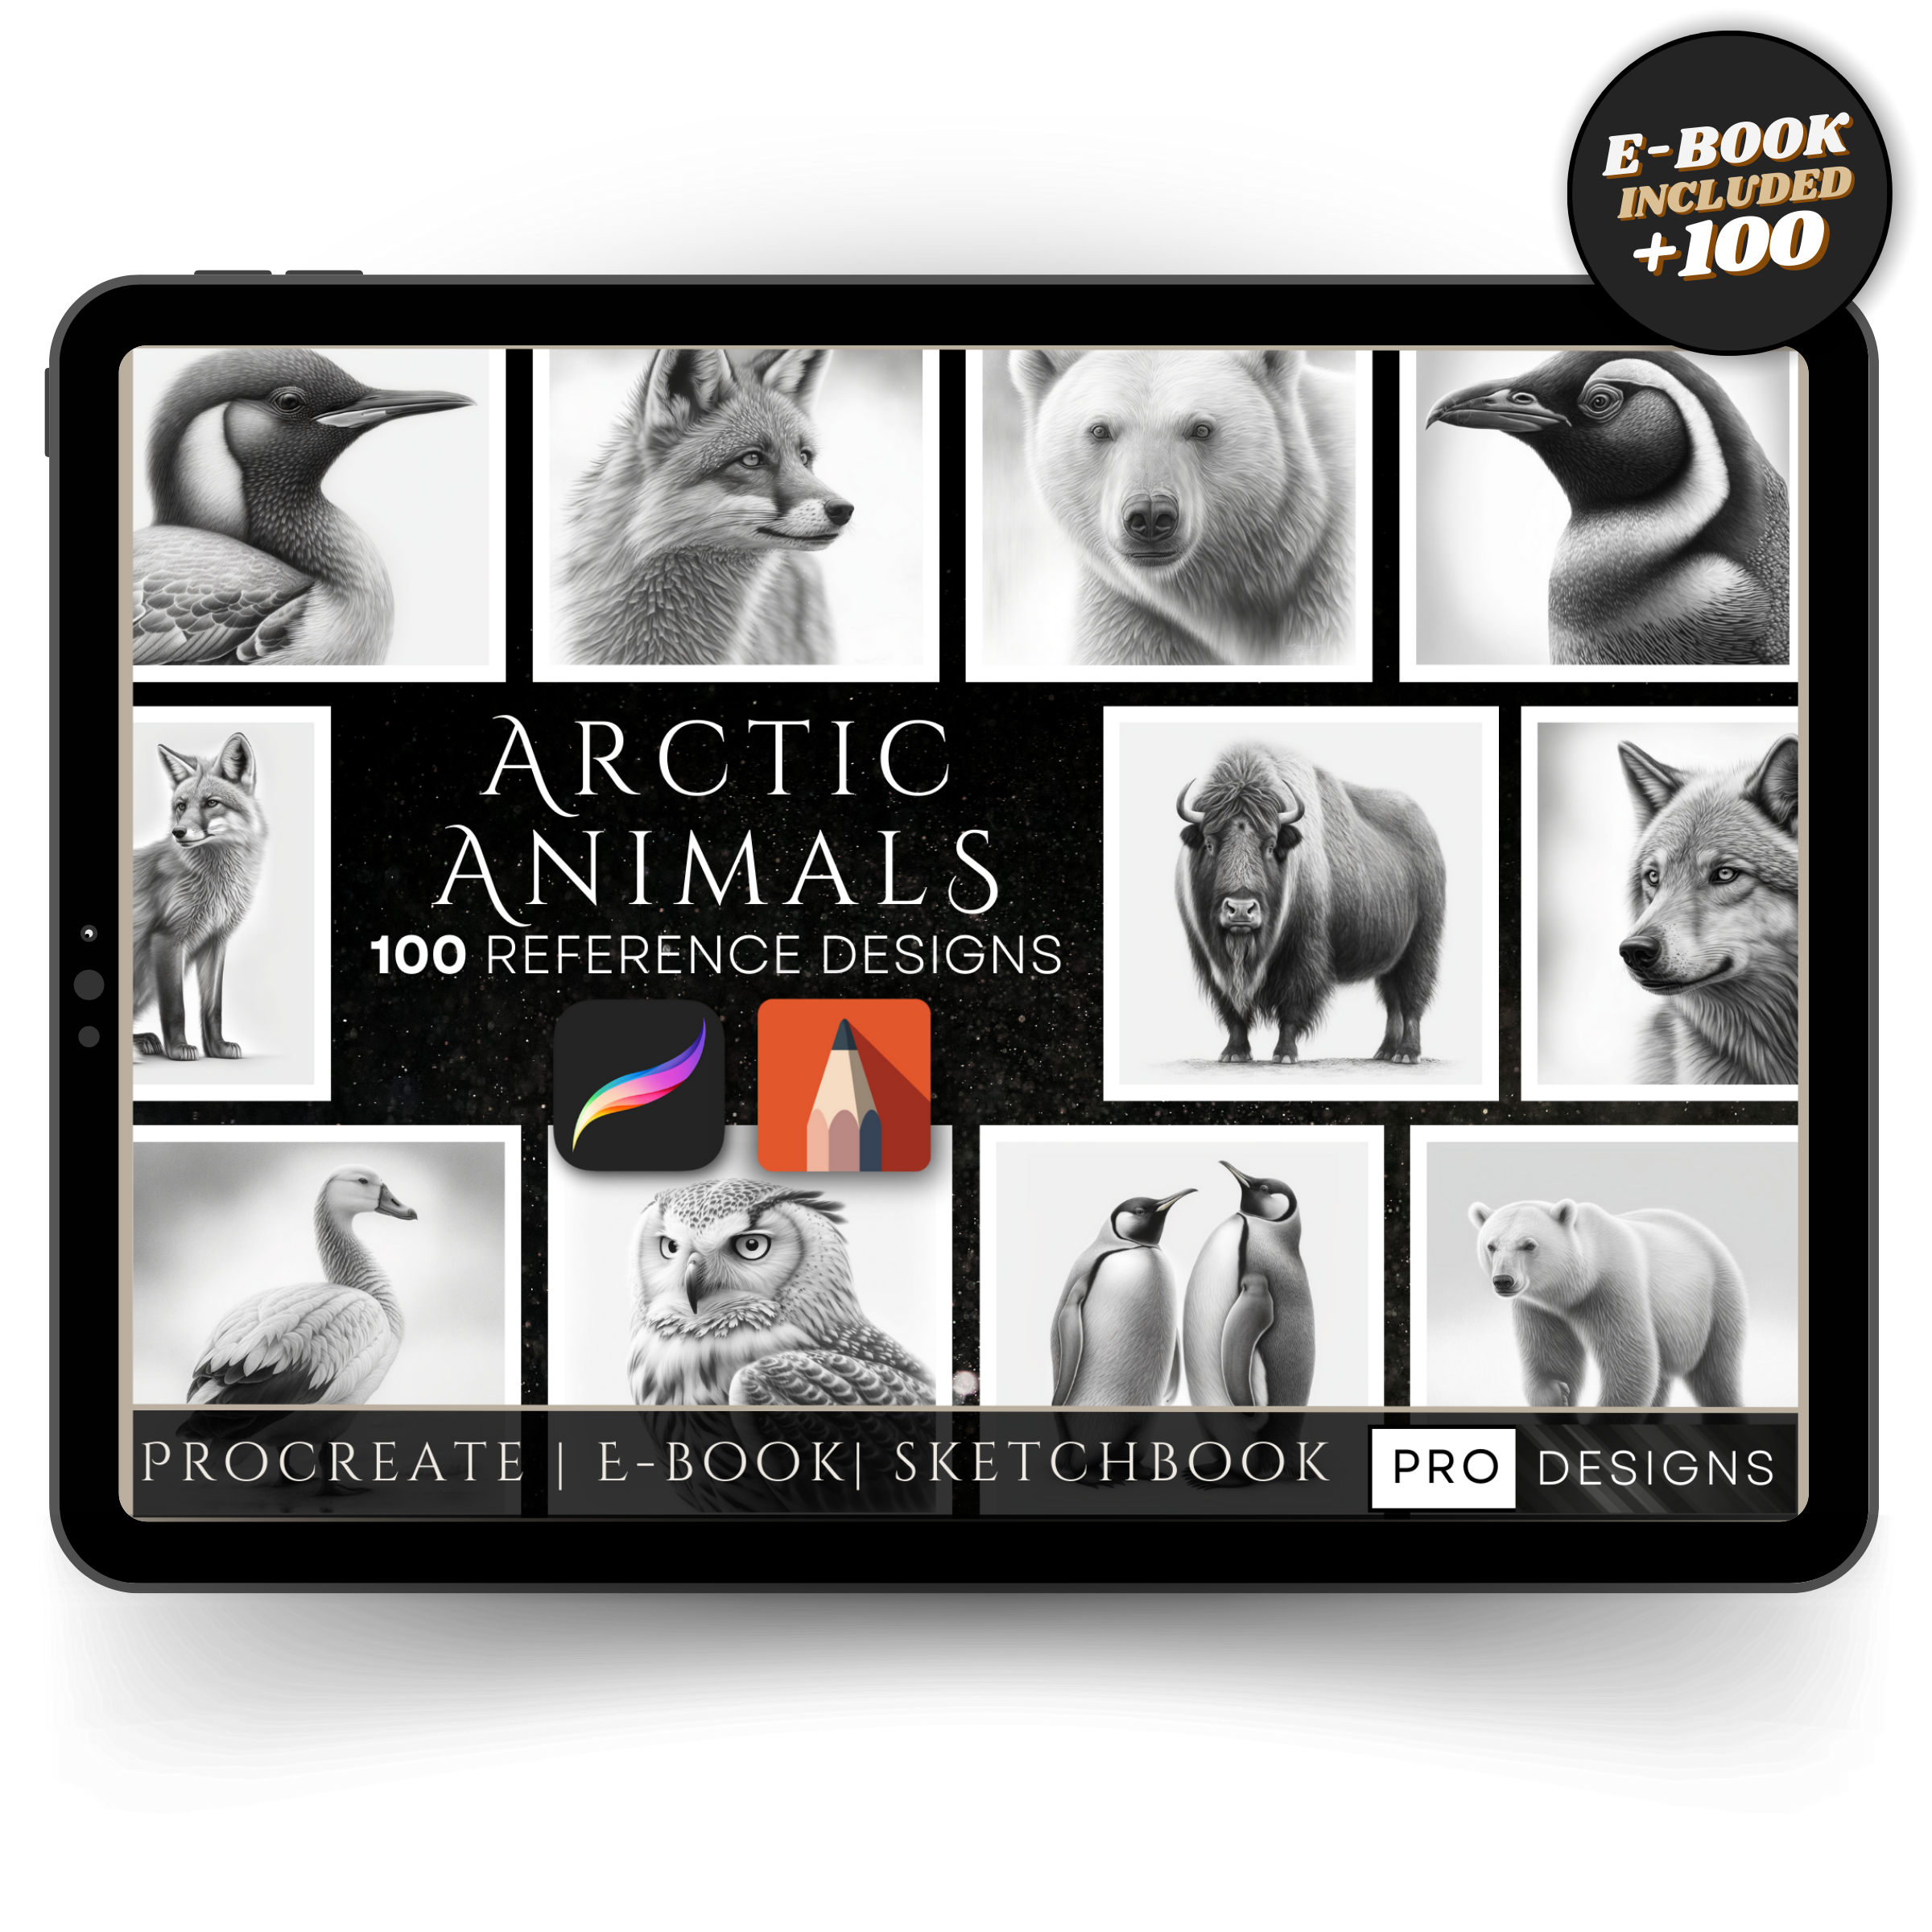 Arctic Animals" - Embrace the Majestic Wilderness of the North